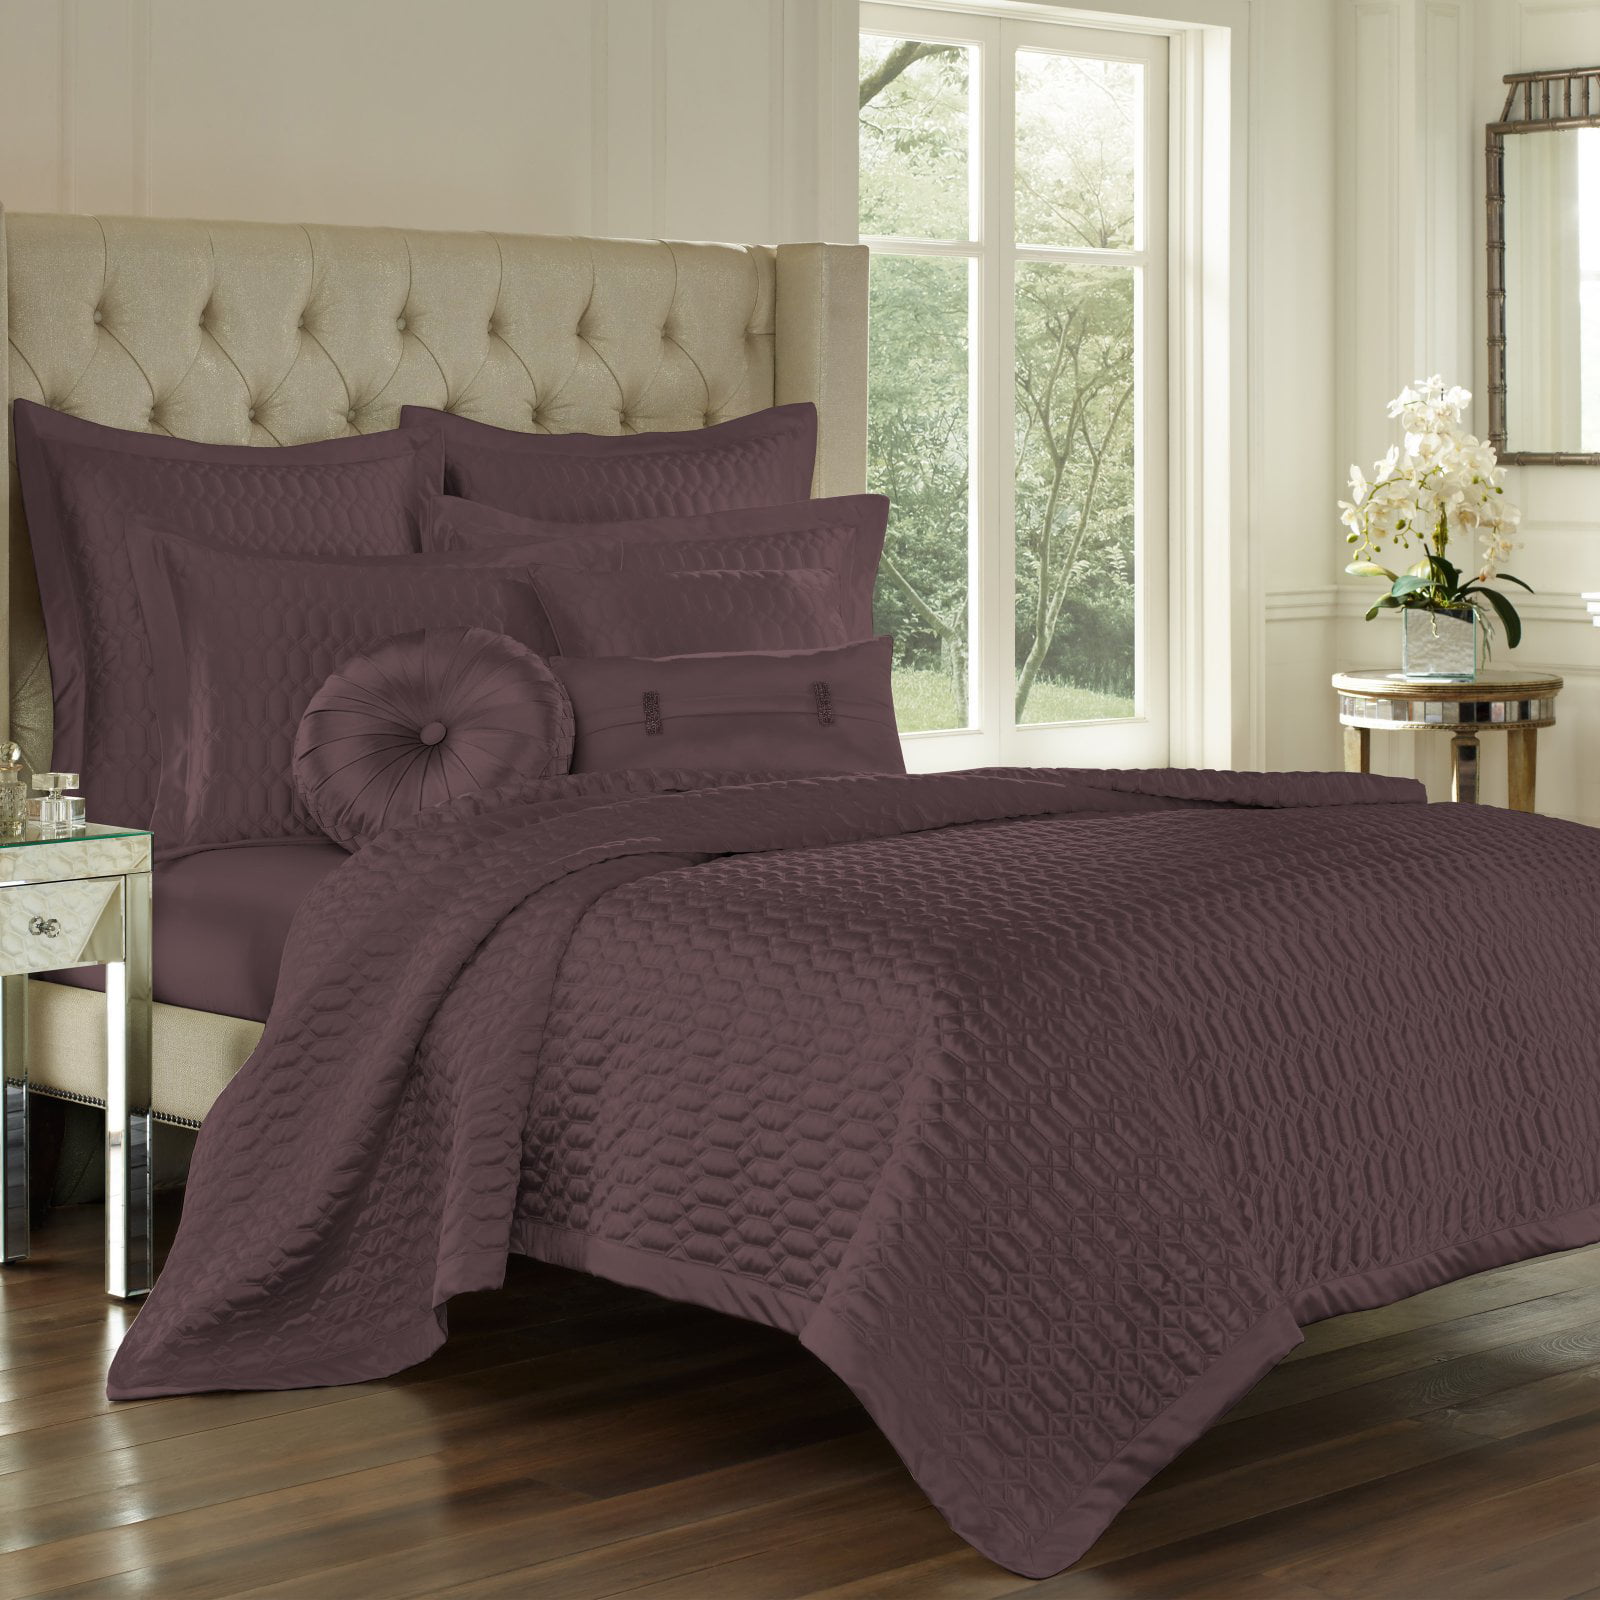 Saranda Satin Quilted Coverlet By Five Queens Court Walmart Com